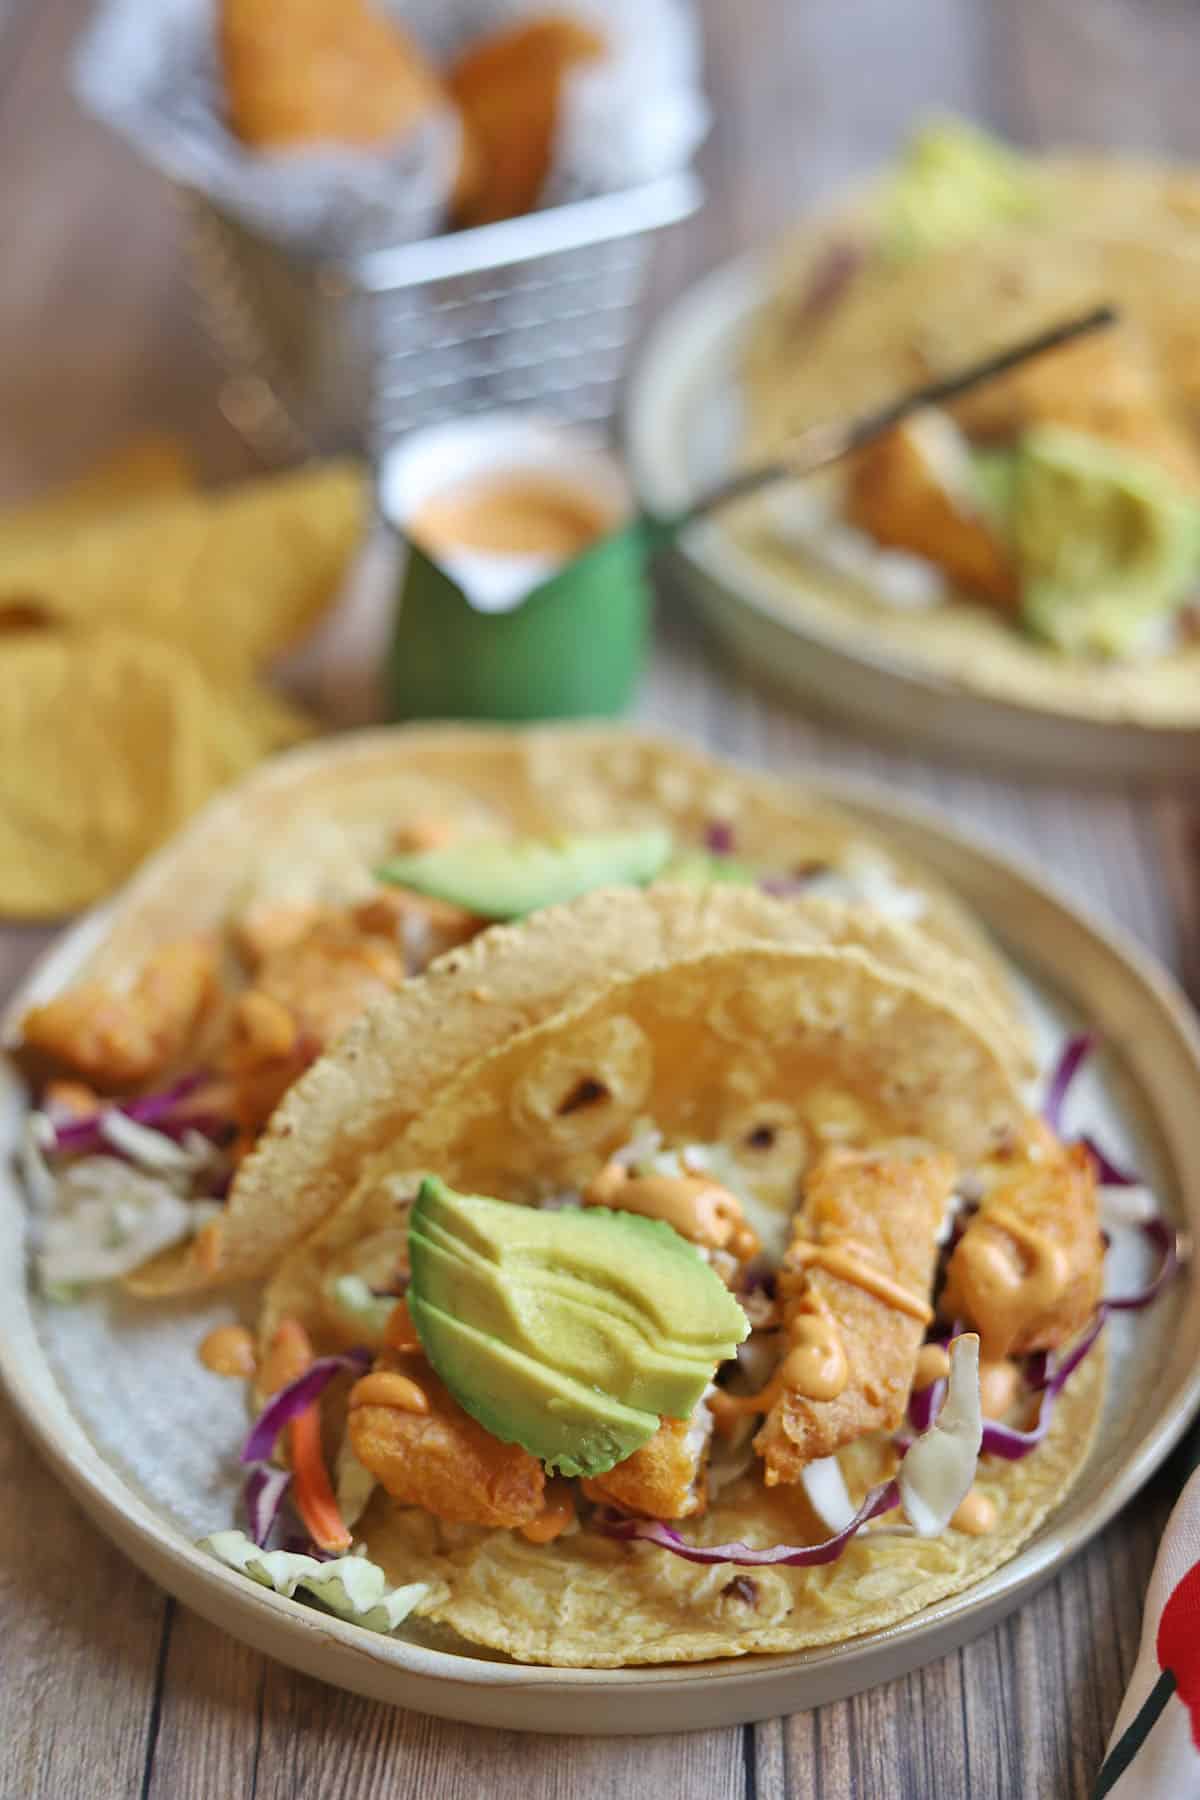 Vegan fish tacos on plates by chipotle crema.